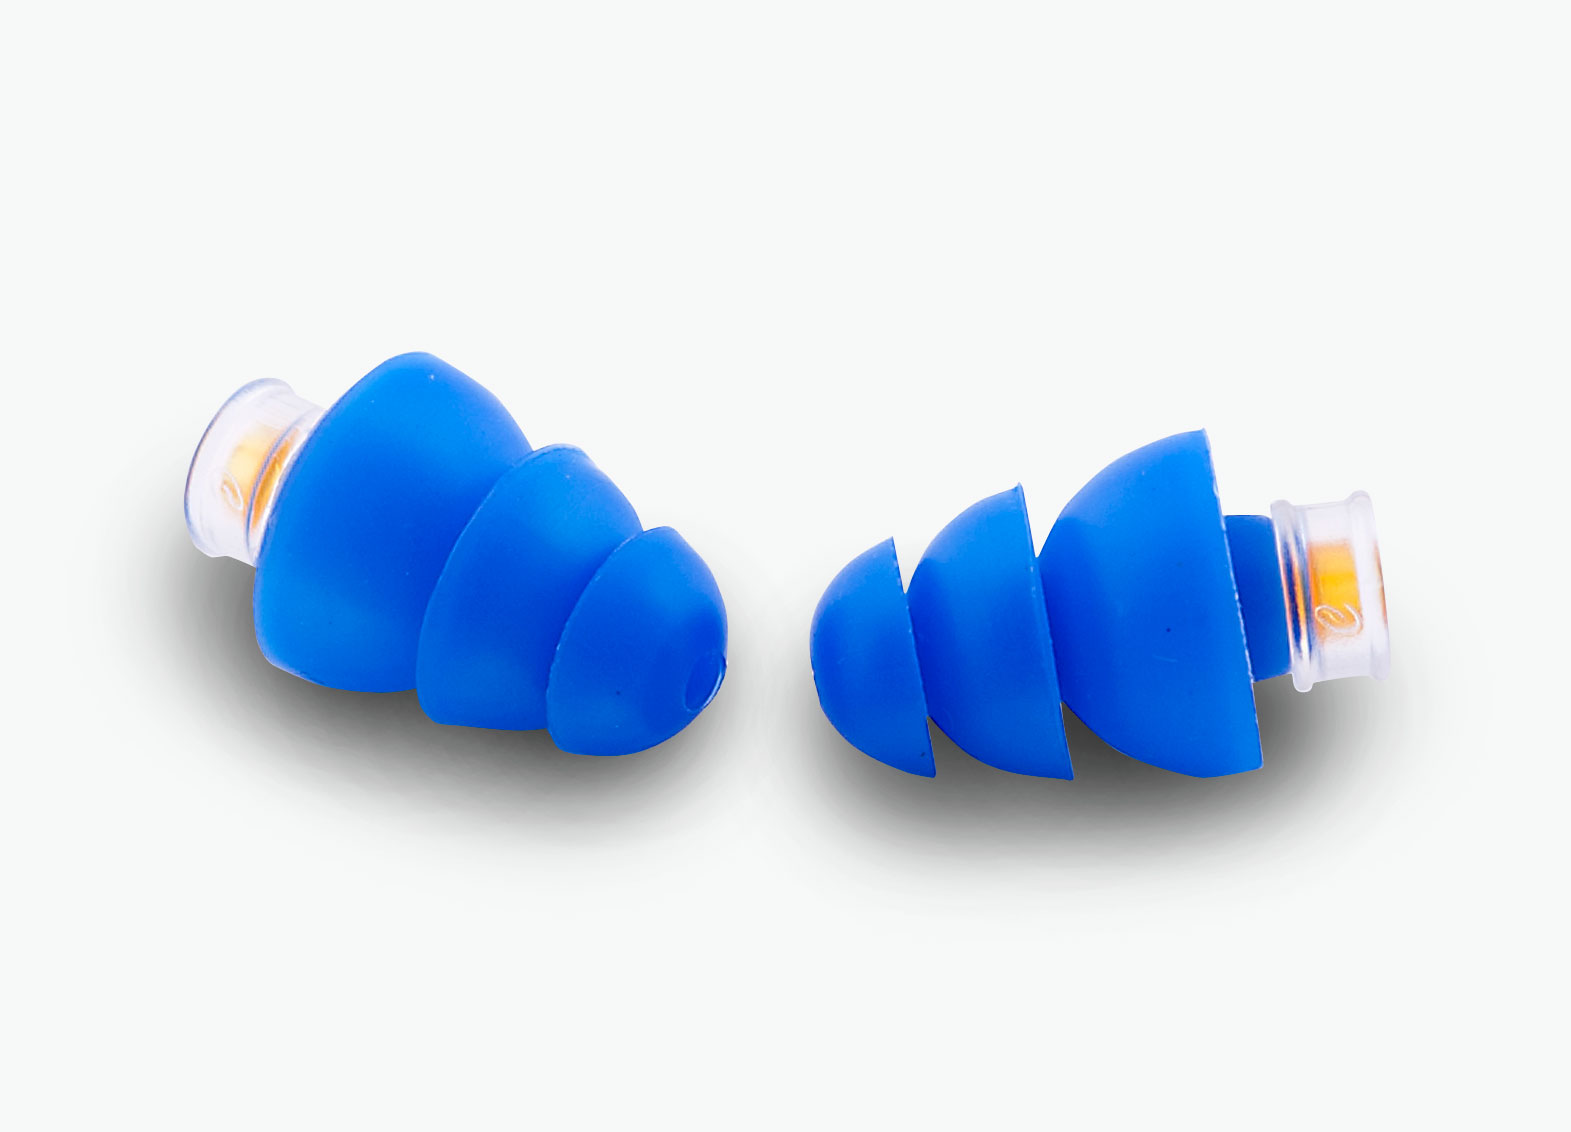 kesoto Reusable Silicone Swimming Earplugs Soft Flexible Ear Plugs for Hearing Protection Concerts Airplanes Sleeping 